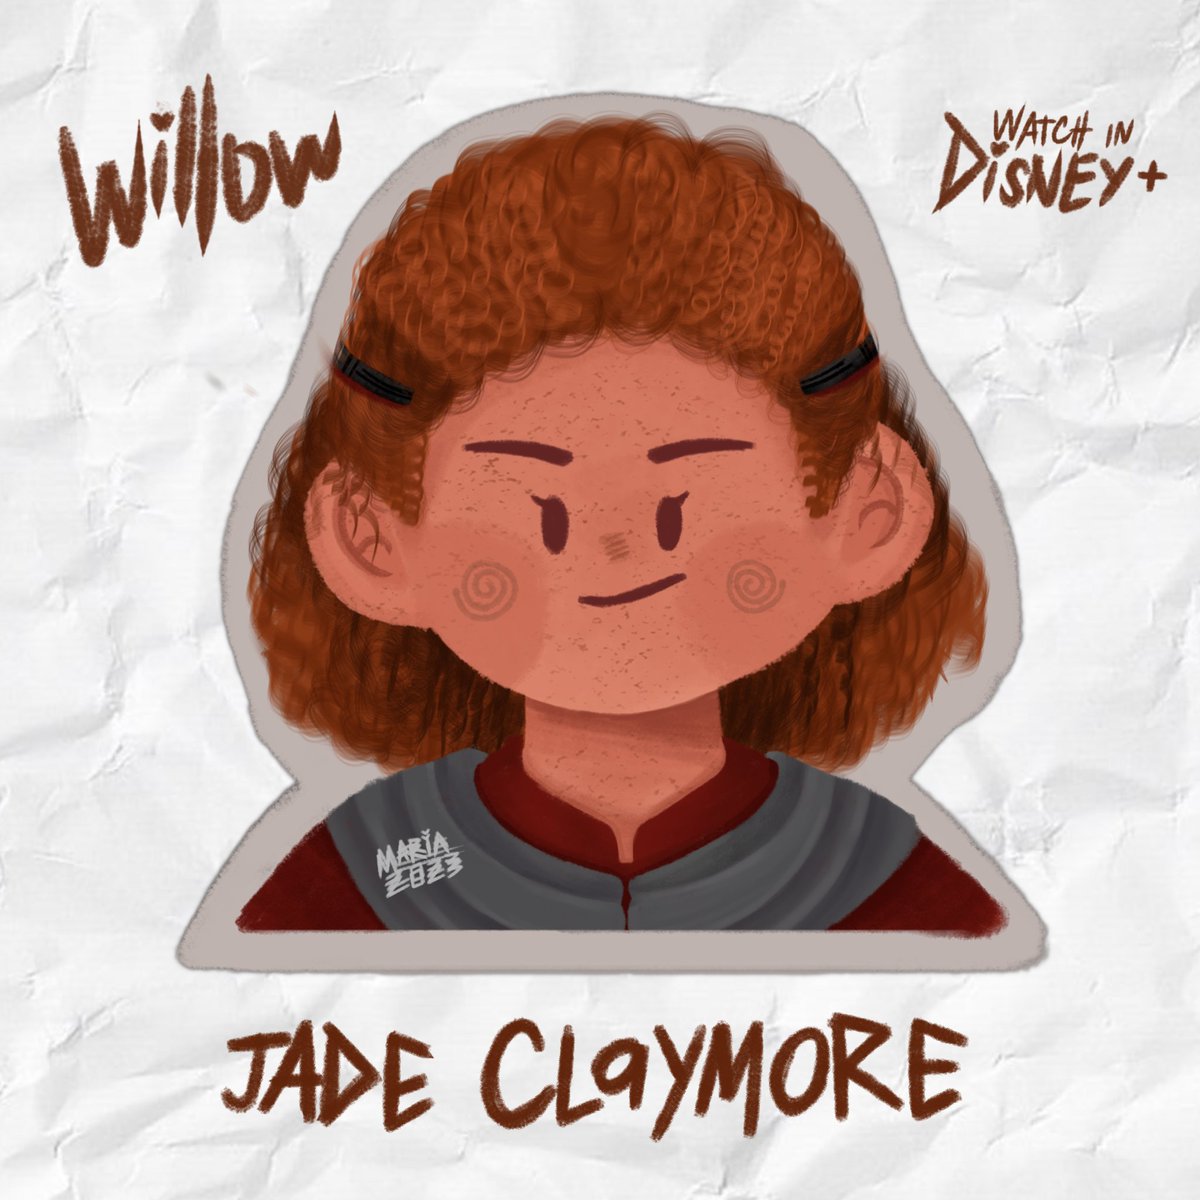 jade claymore from #willow

#chibiart #art #JadeClaymore